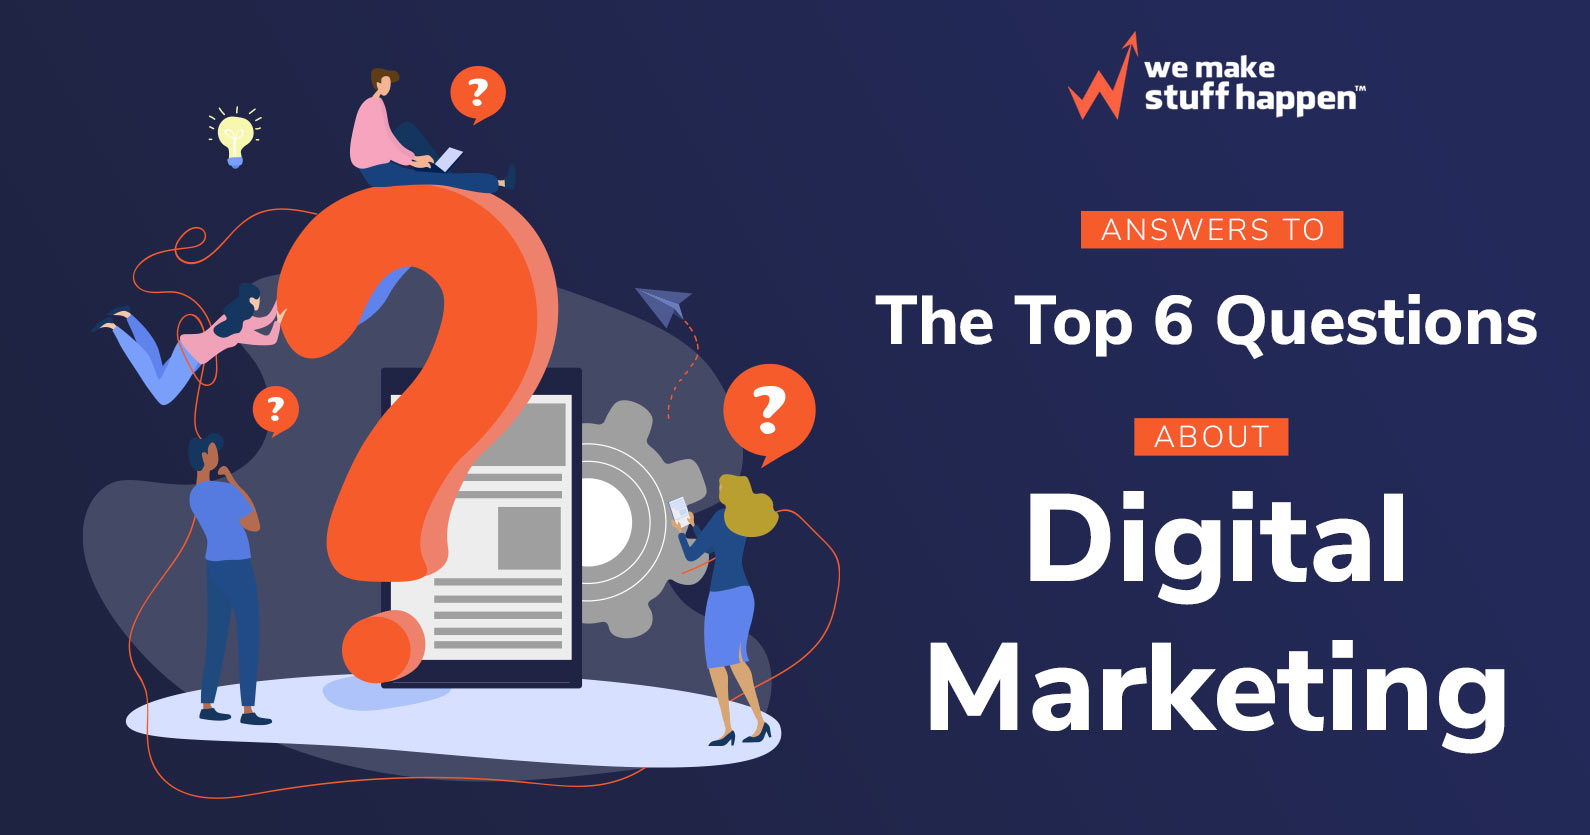 Answers to the Top 6 Questions About Digital Marketing